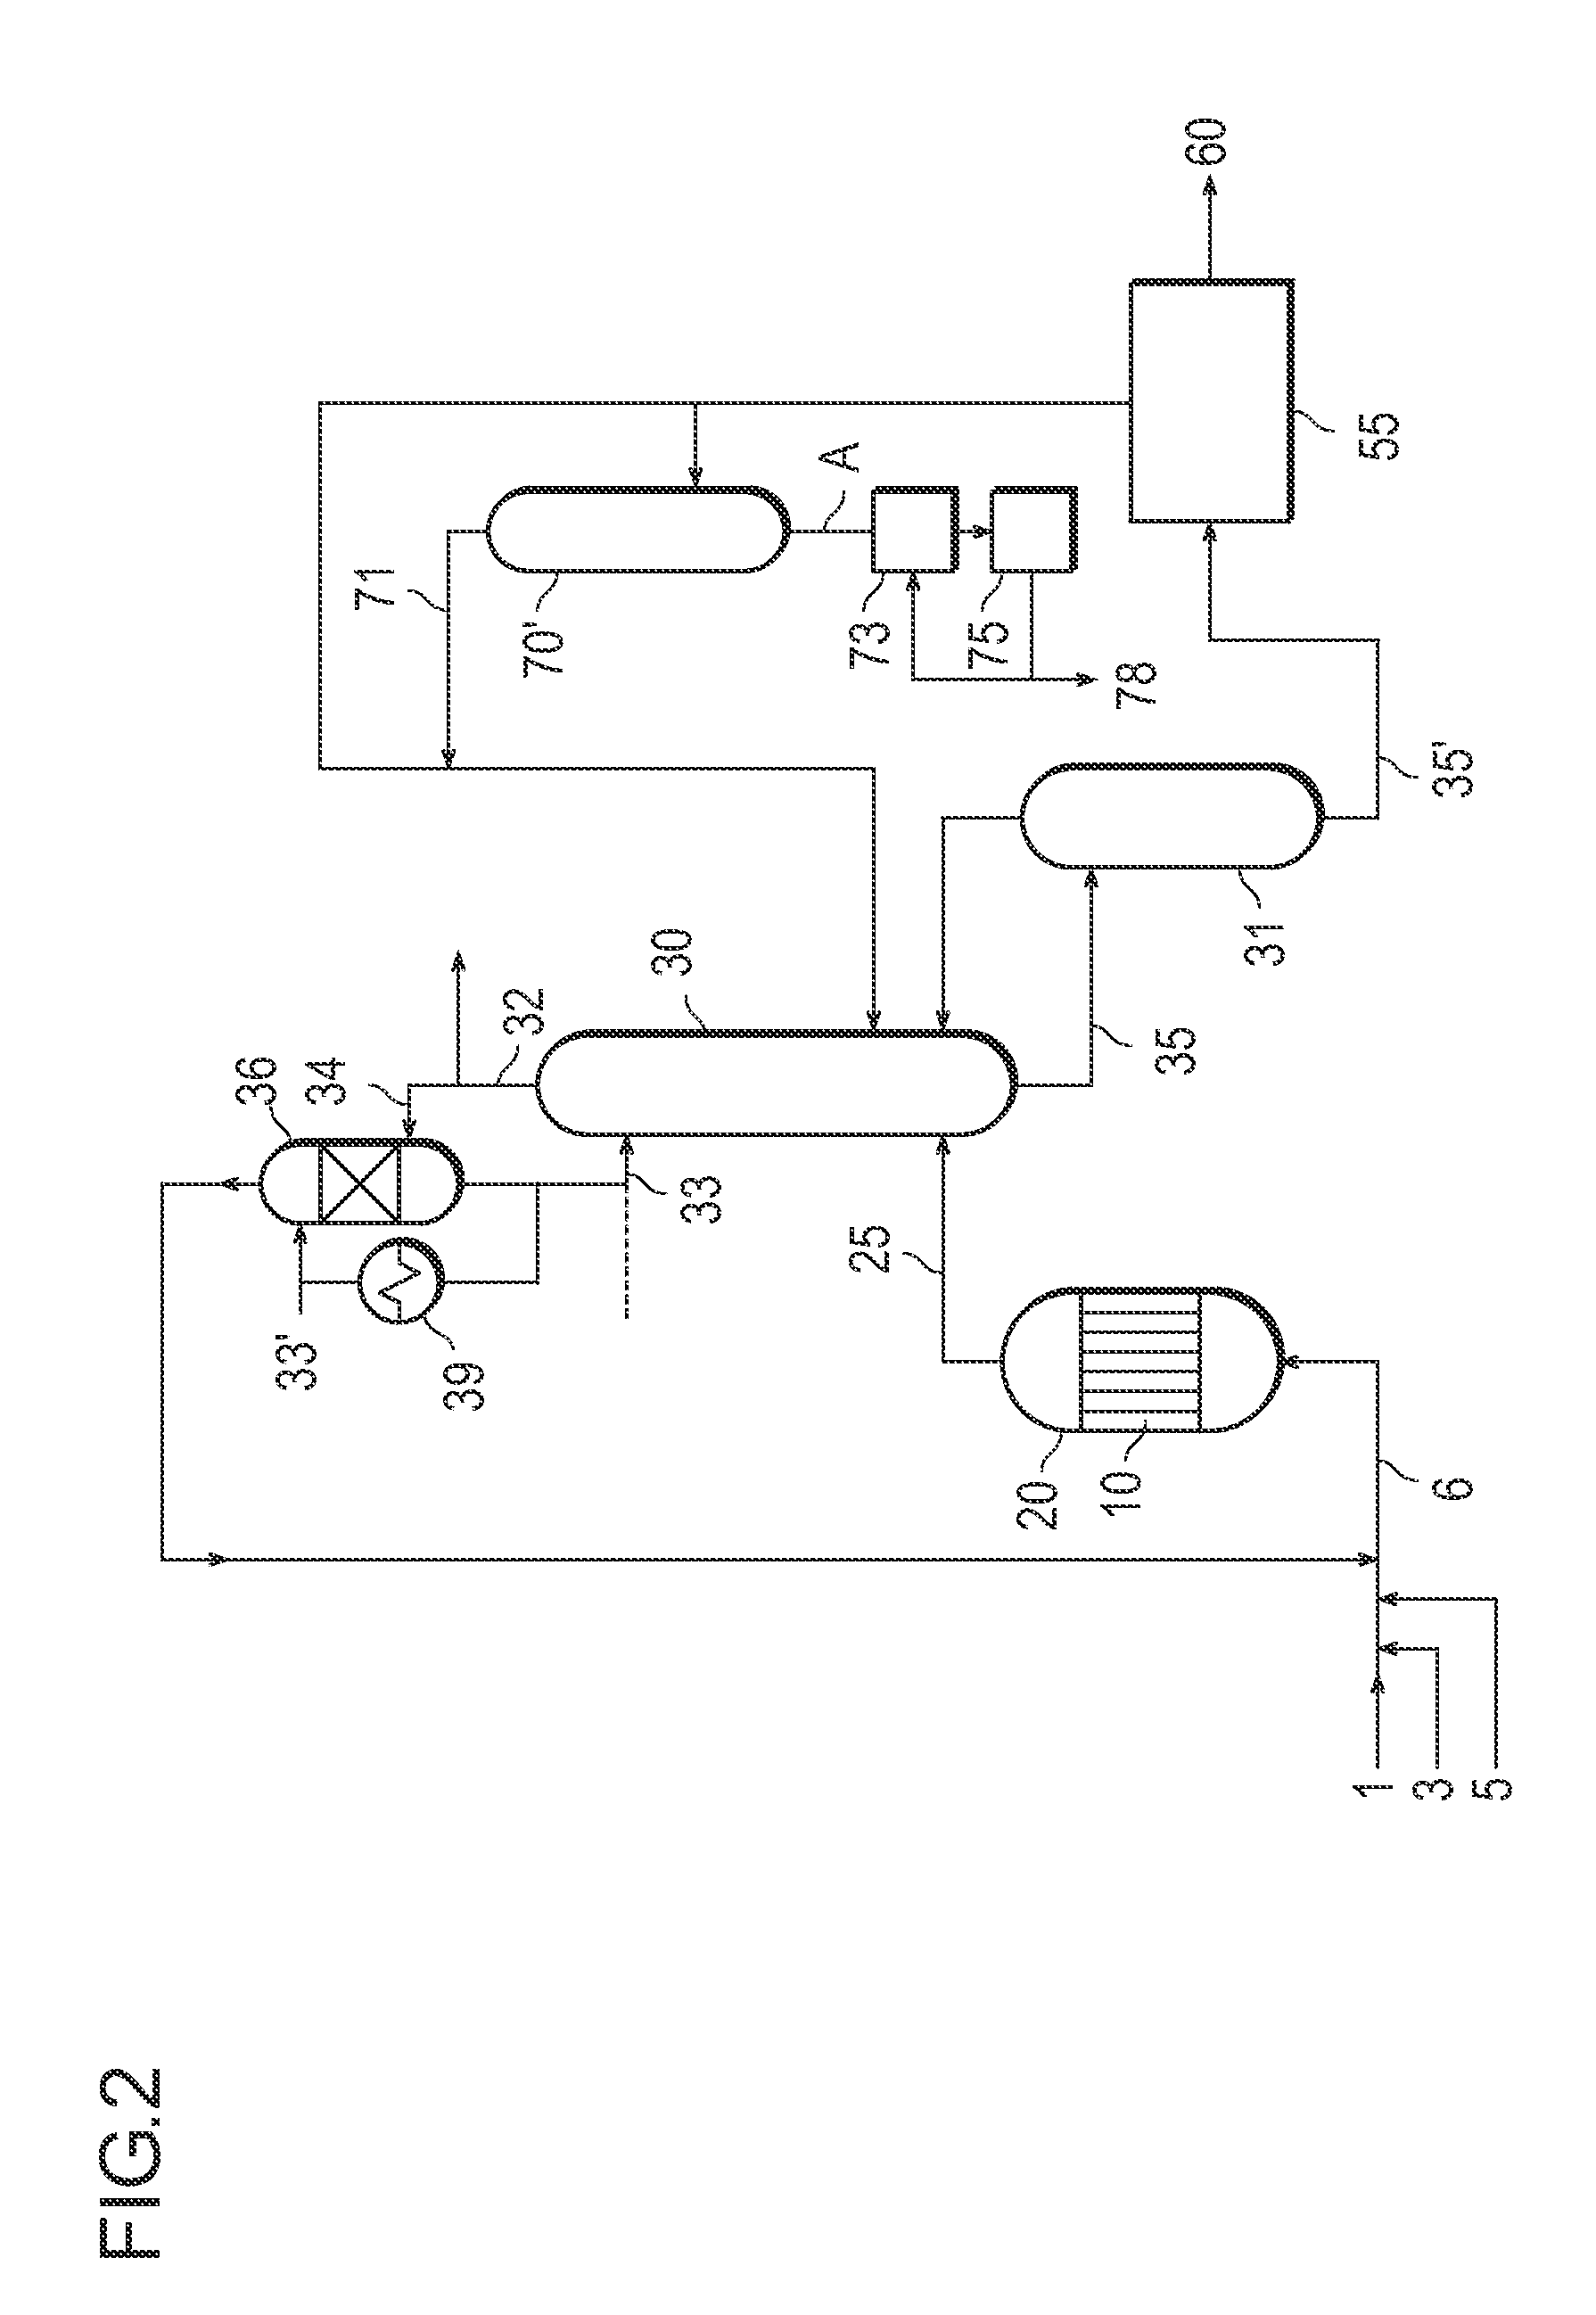 Process for producing acrylic acid, and process for producing hydrophilic resin and process for producing water absorptive resin using the process